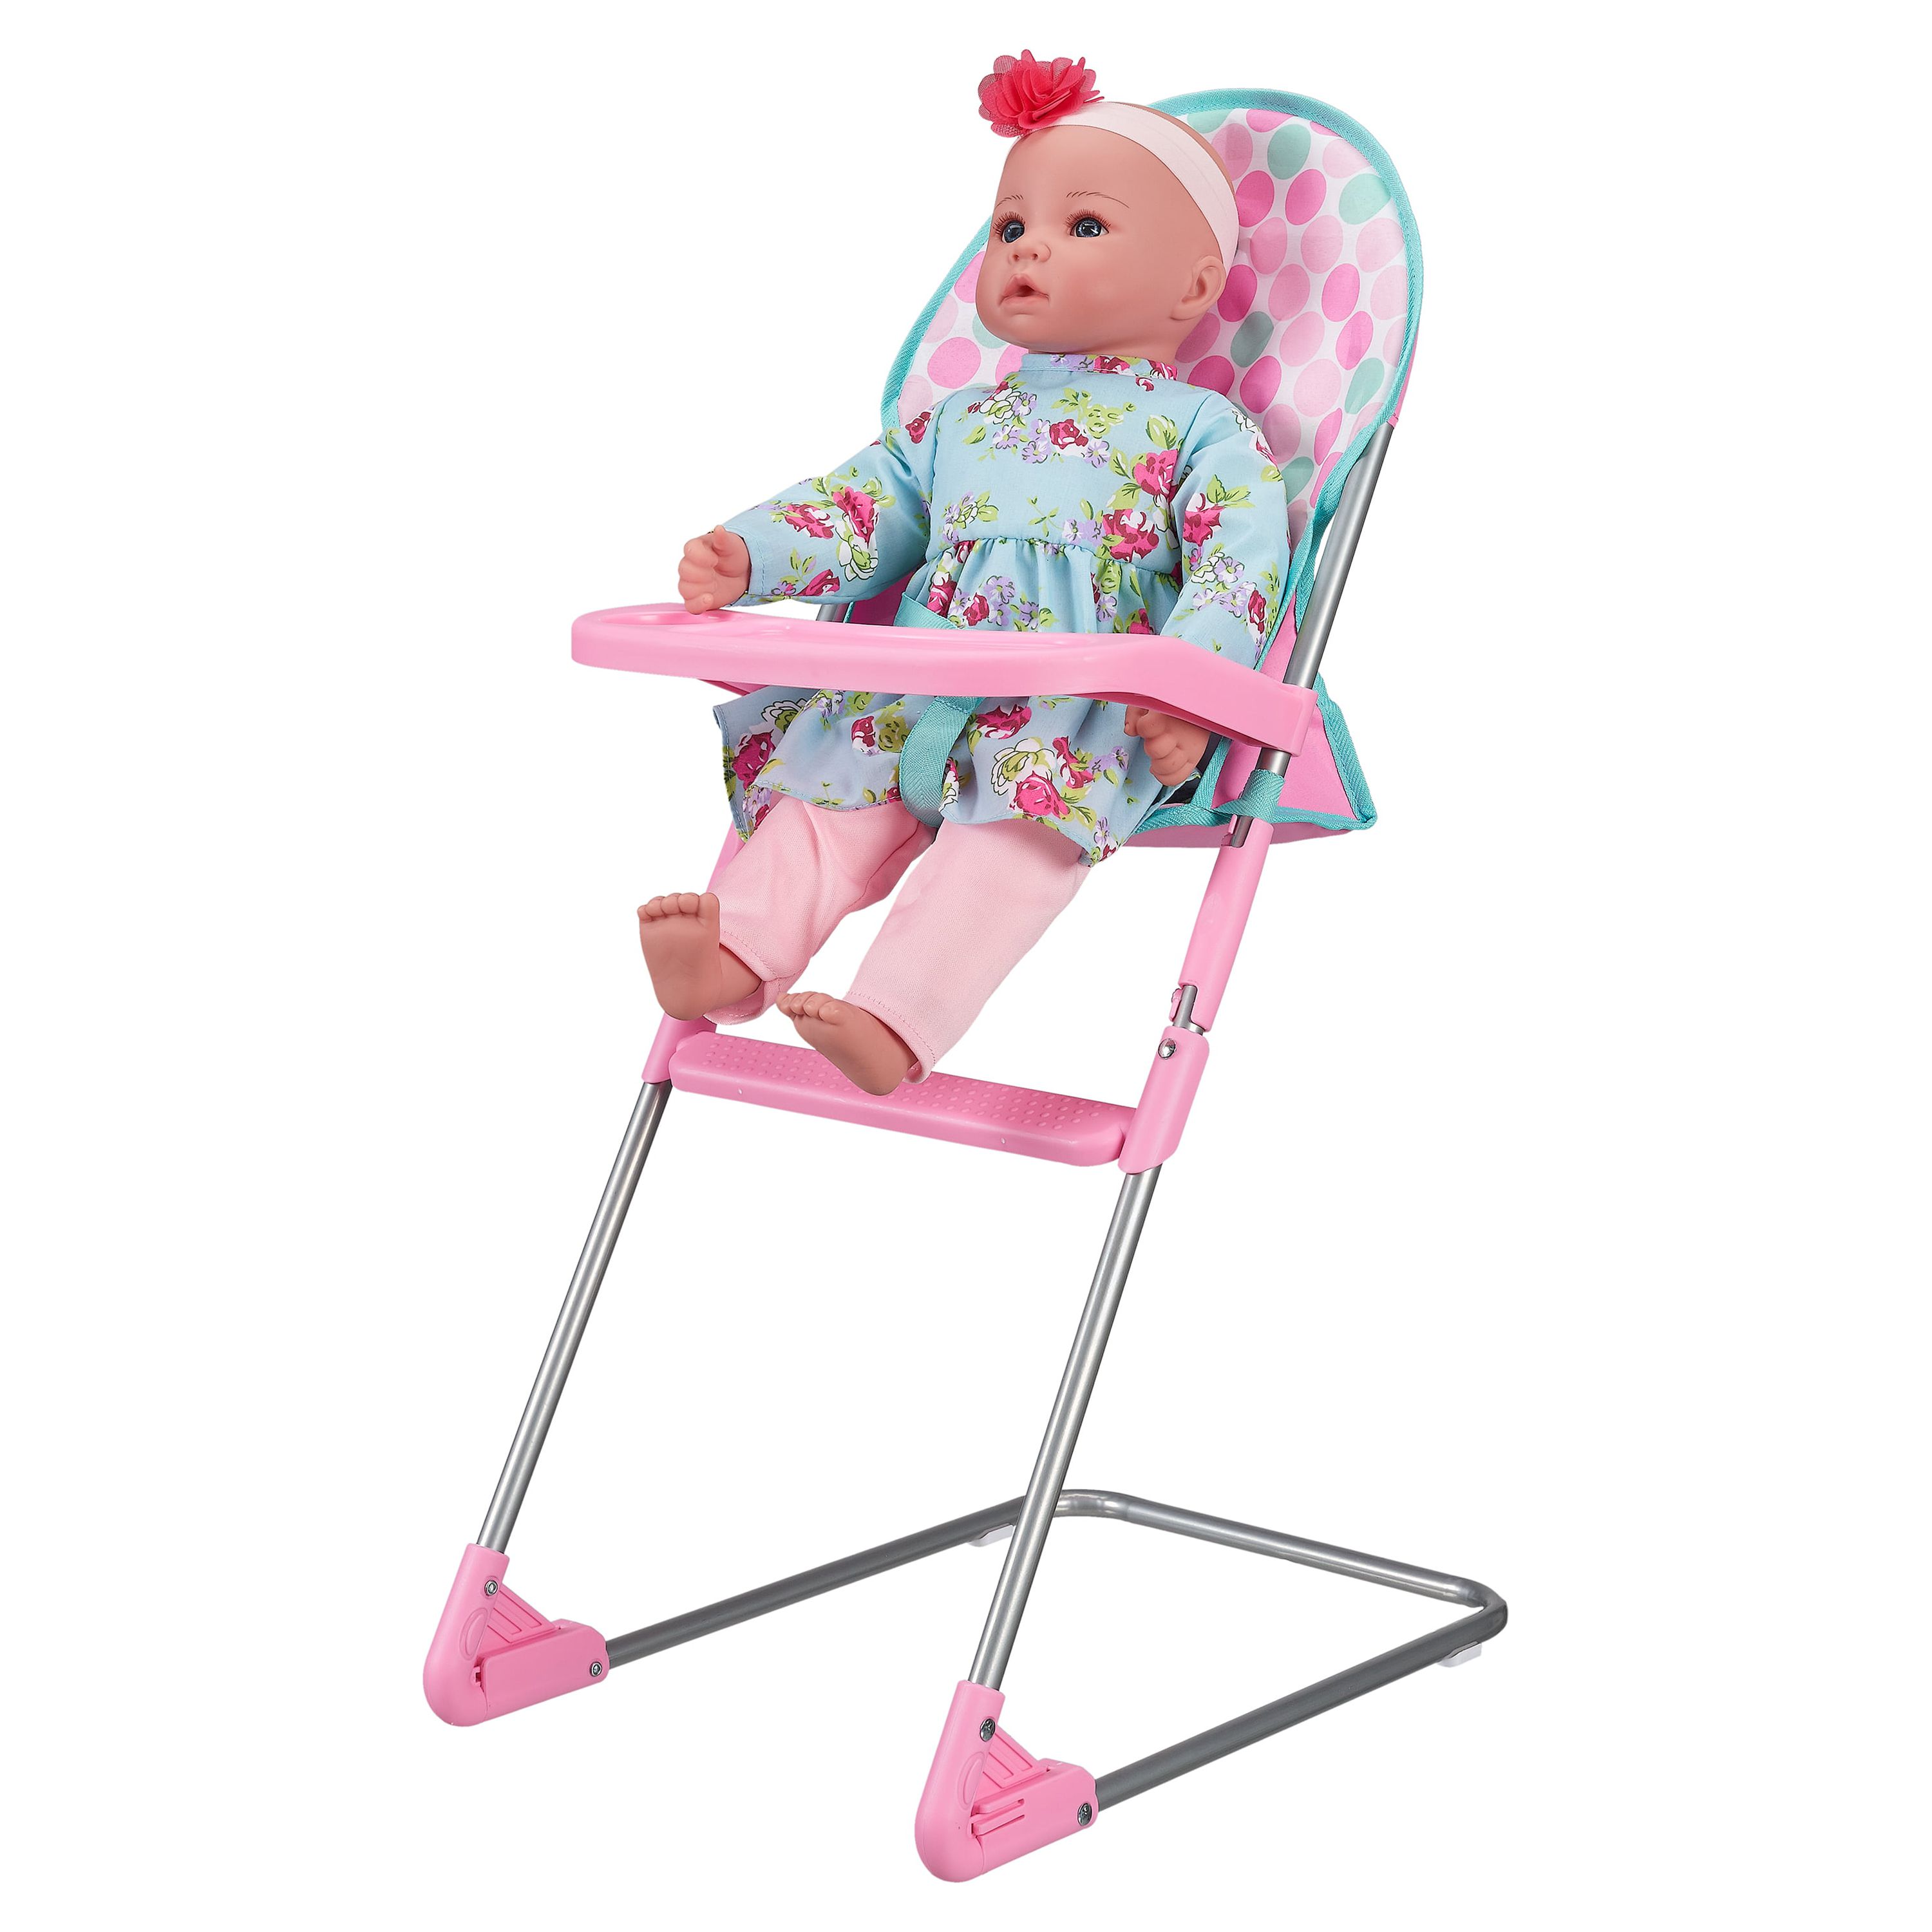 My Sweet Love 3 Piece Doll Accessory Set for 18" Dolls, Pink & Blue - image 3 of 5